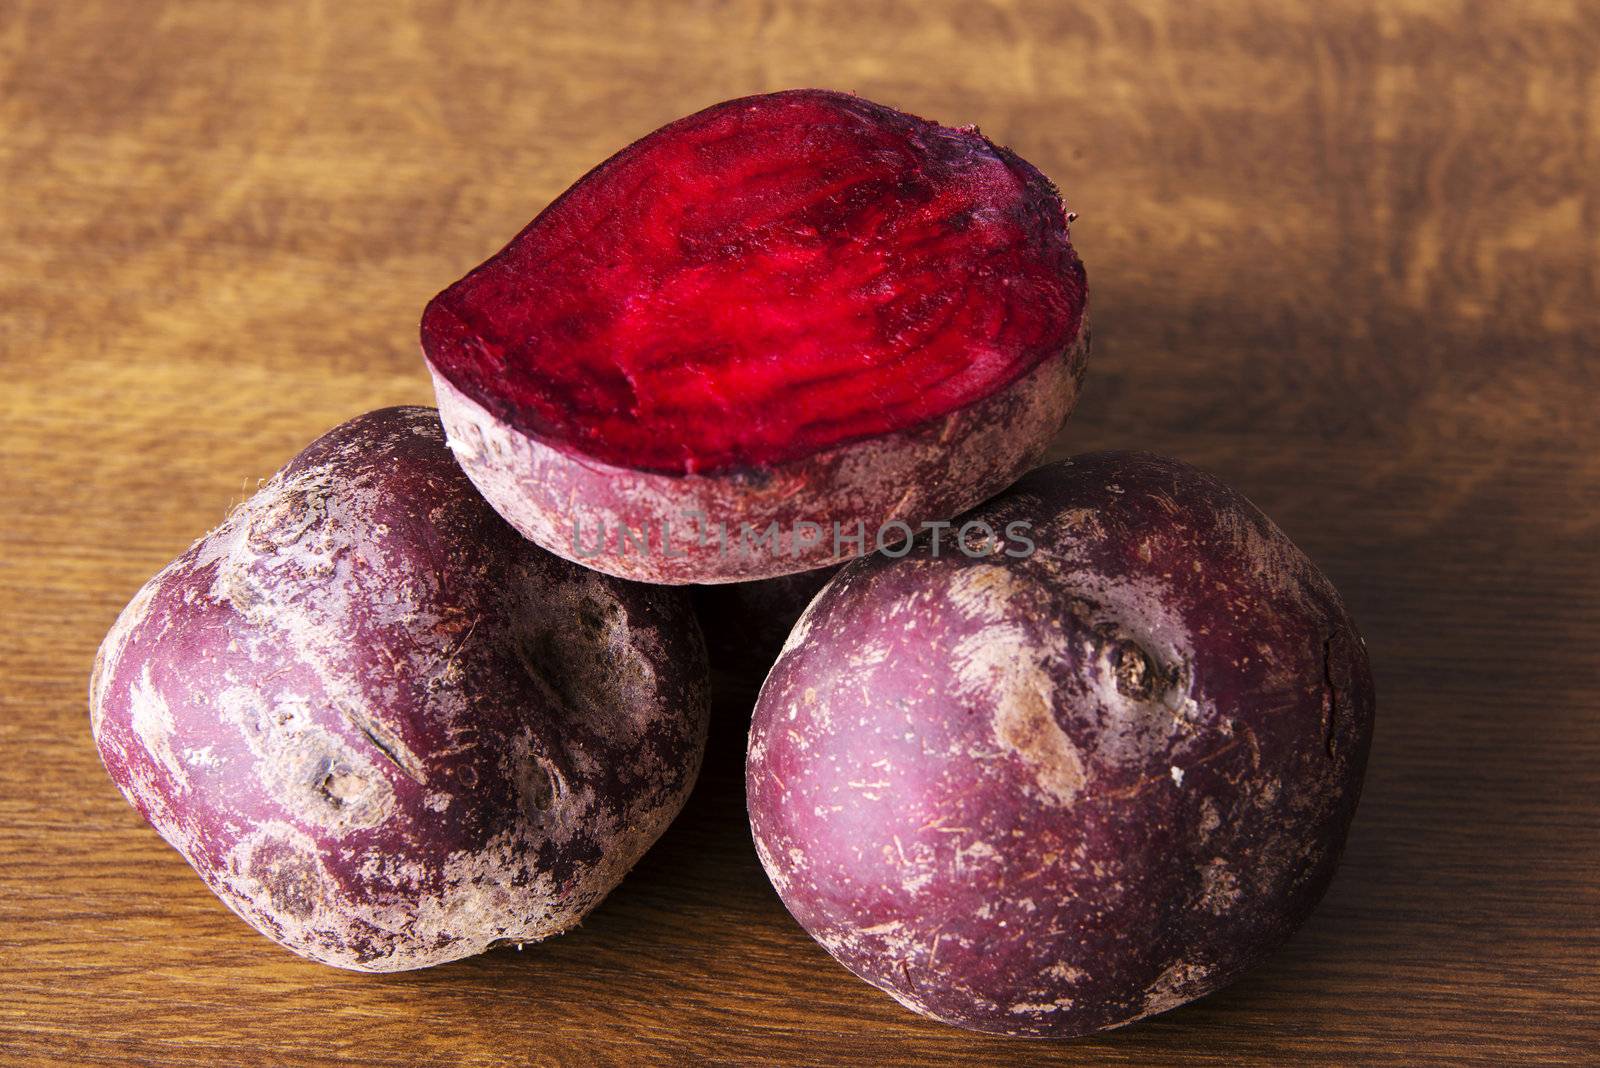 Red beets on table